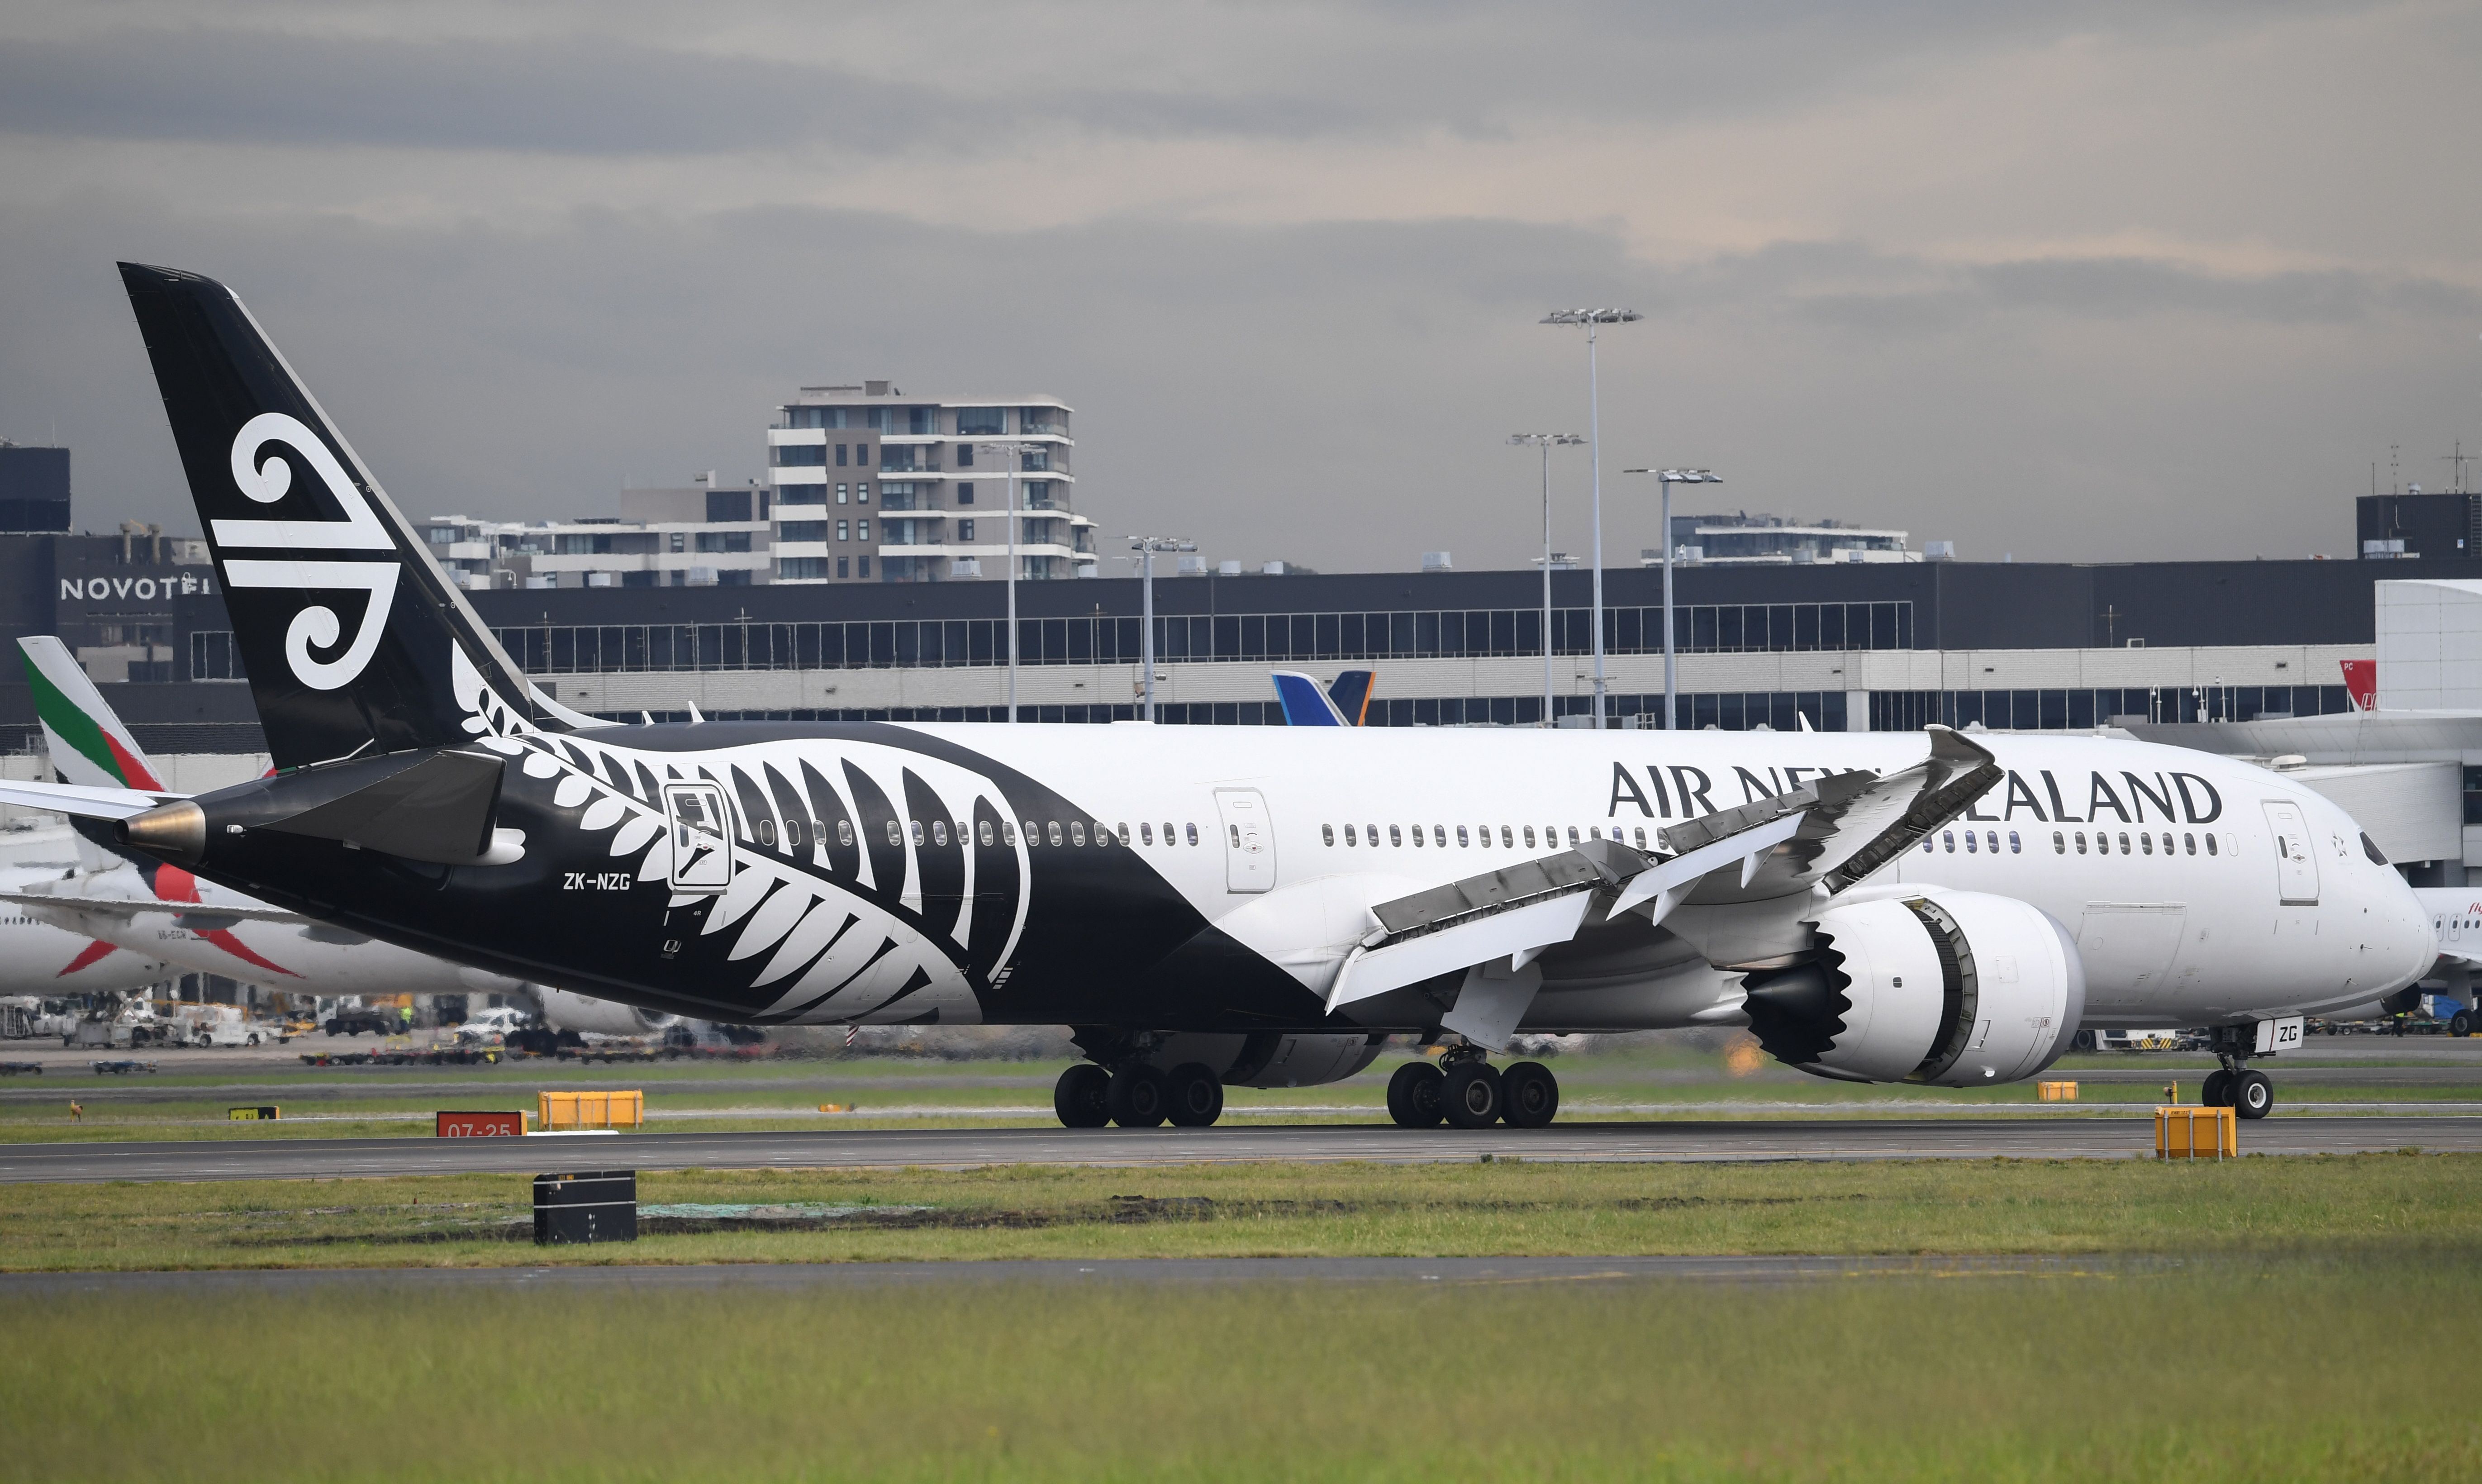 An Air New Zealand Boeing 787 jet lands at Kingsford Smith International on April 30, 2020 in Sydney, Australia.